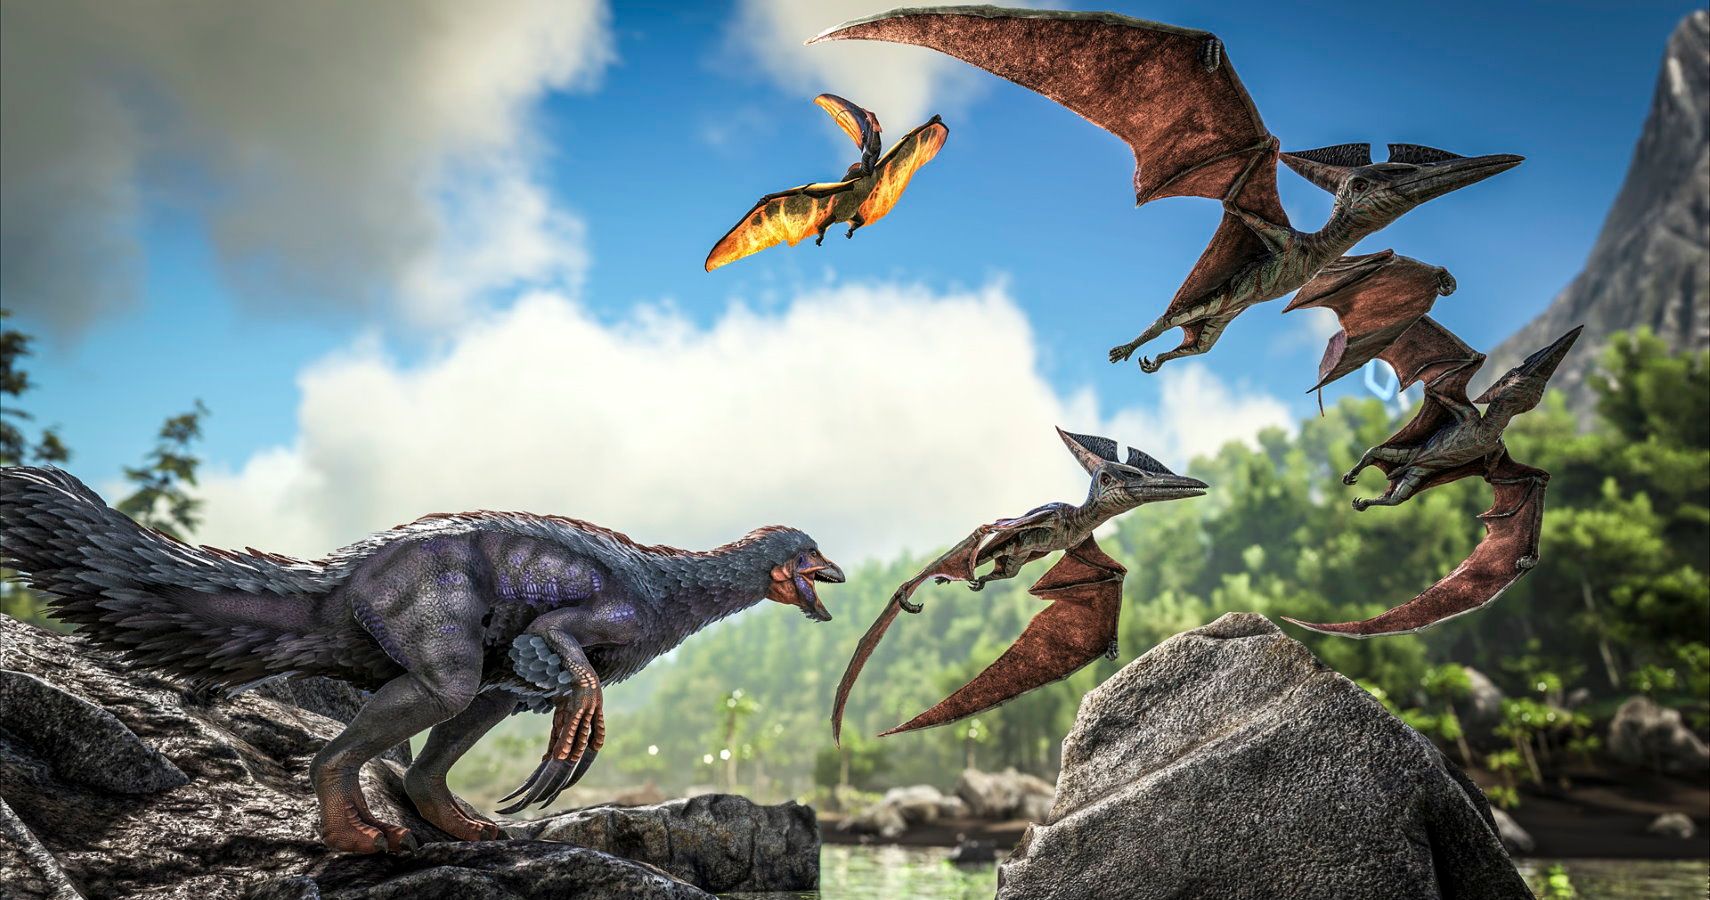 Ark Survival Evolved's Xbox Series X upgrades are mind blowing